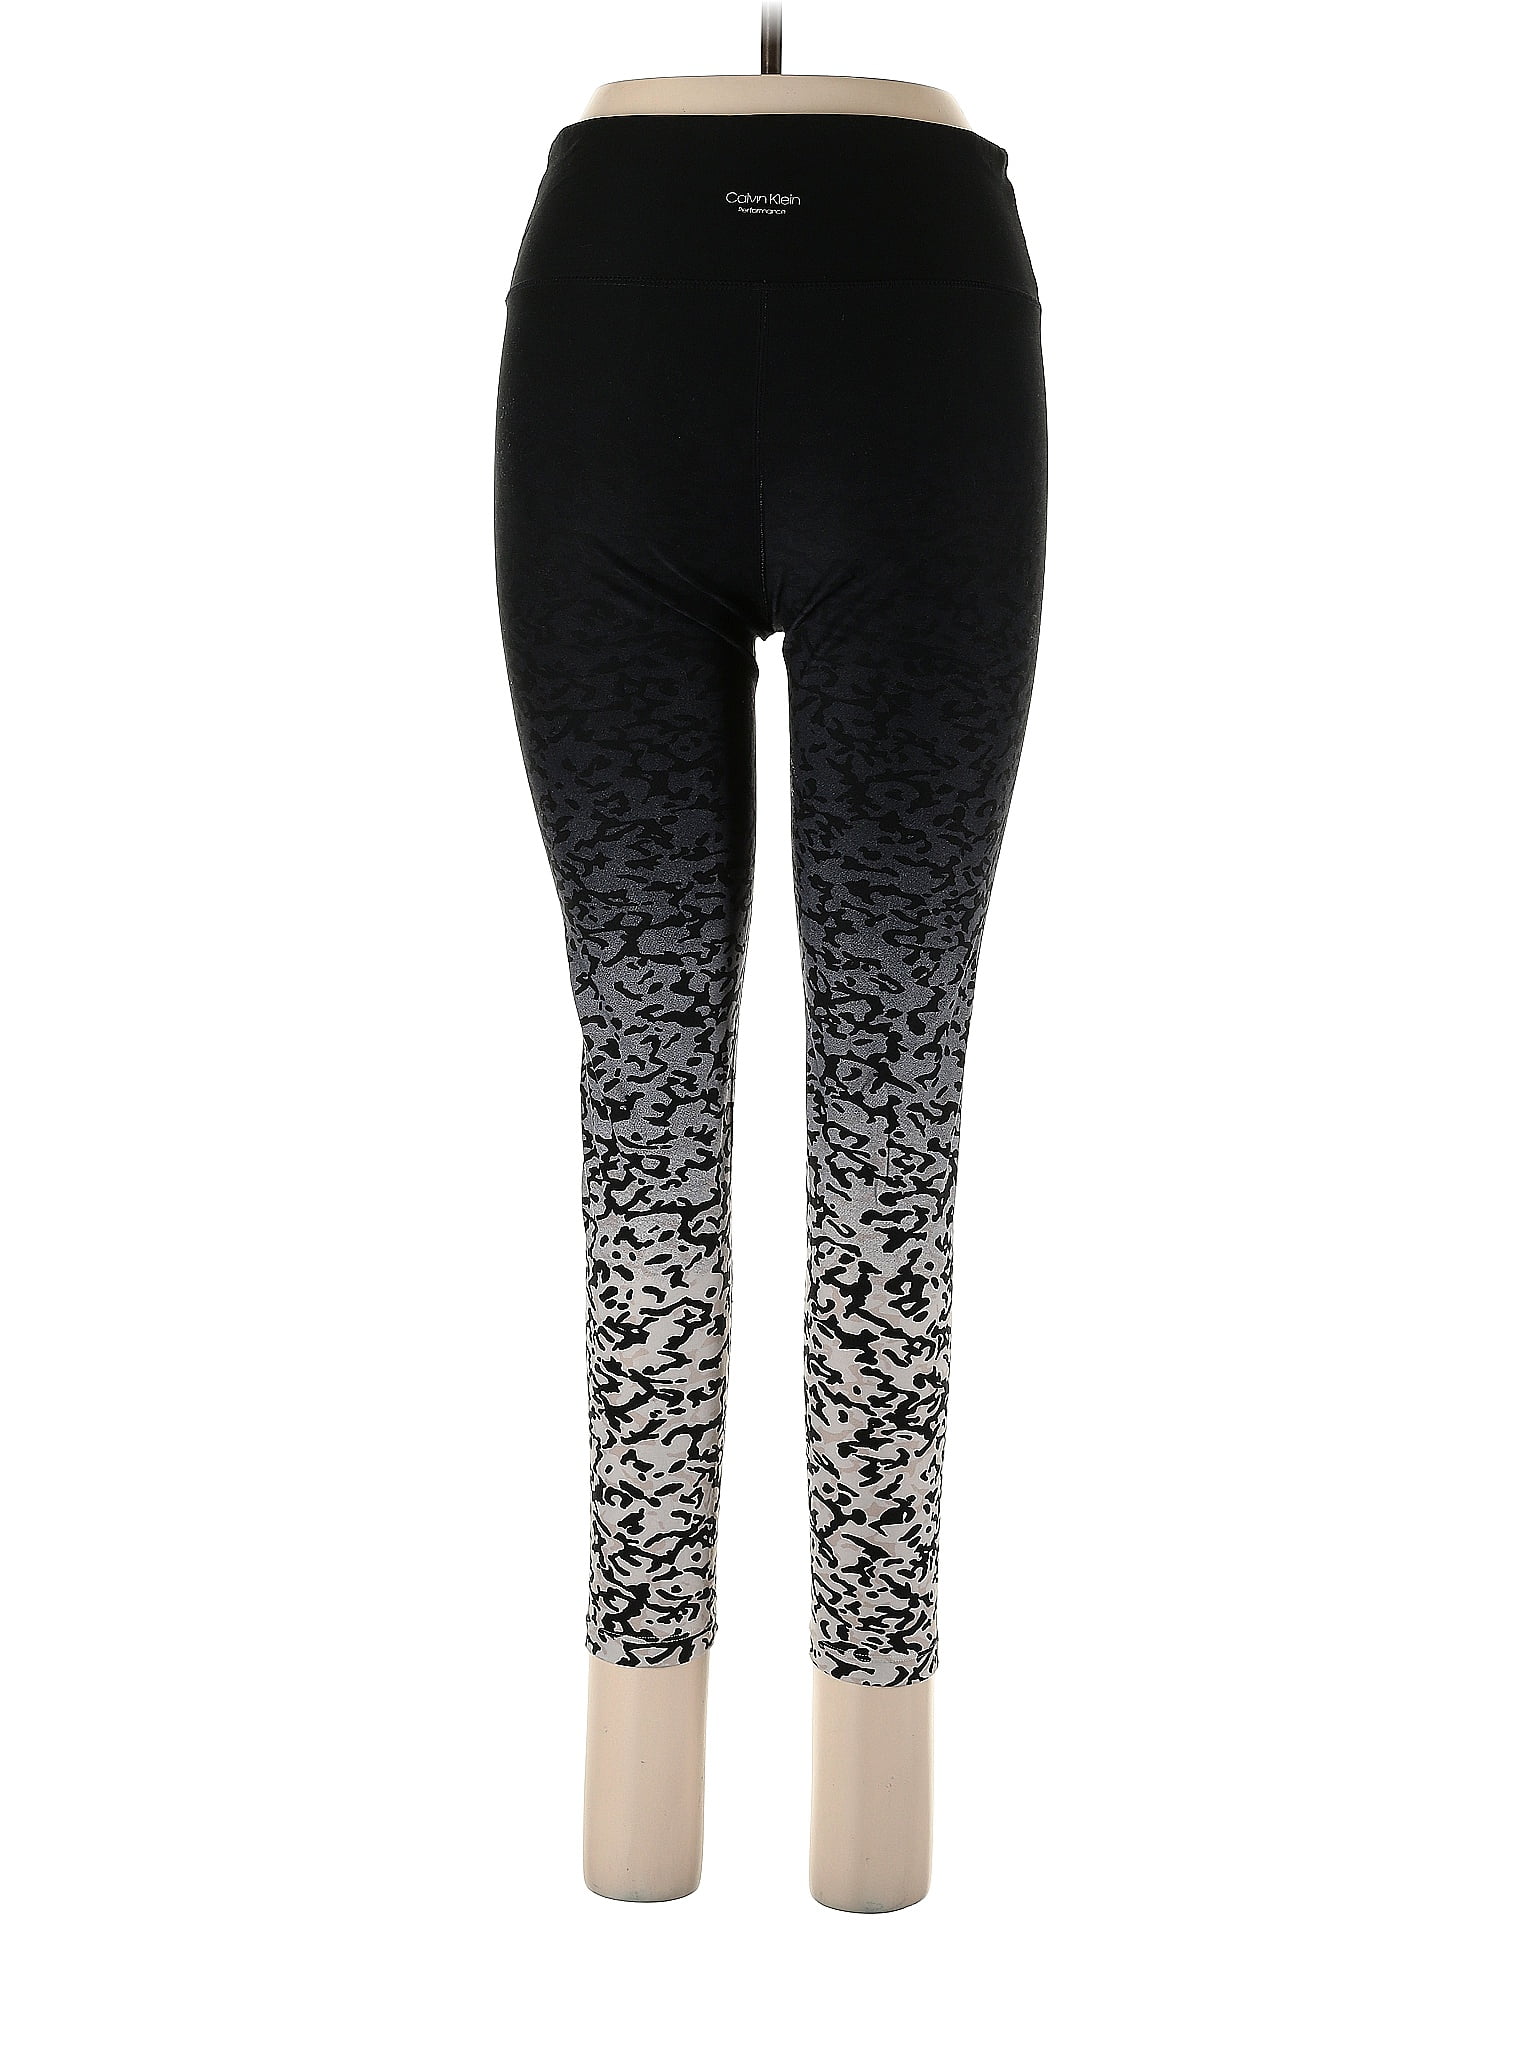 Calia by Carrie Underwood Black Leggings Size XS - 53% off